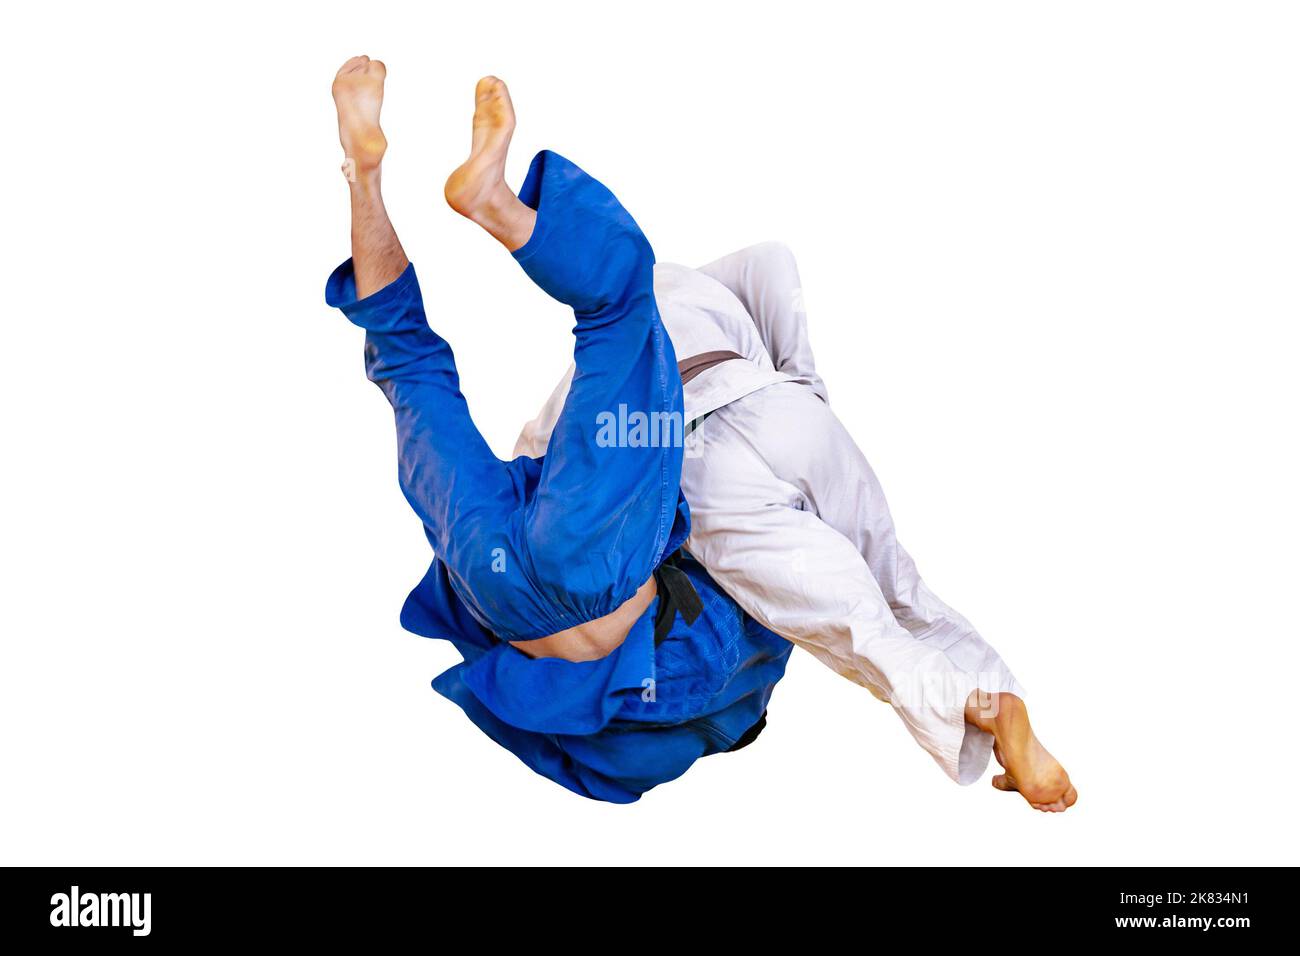 judo fighter is thrown for an ippon Stock Photo